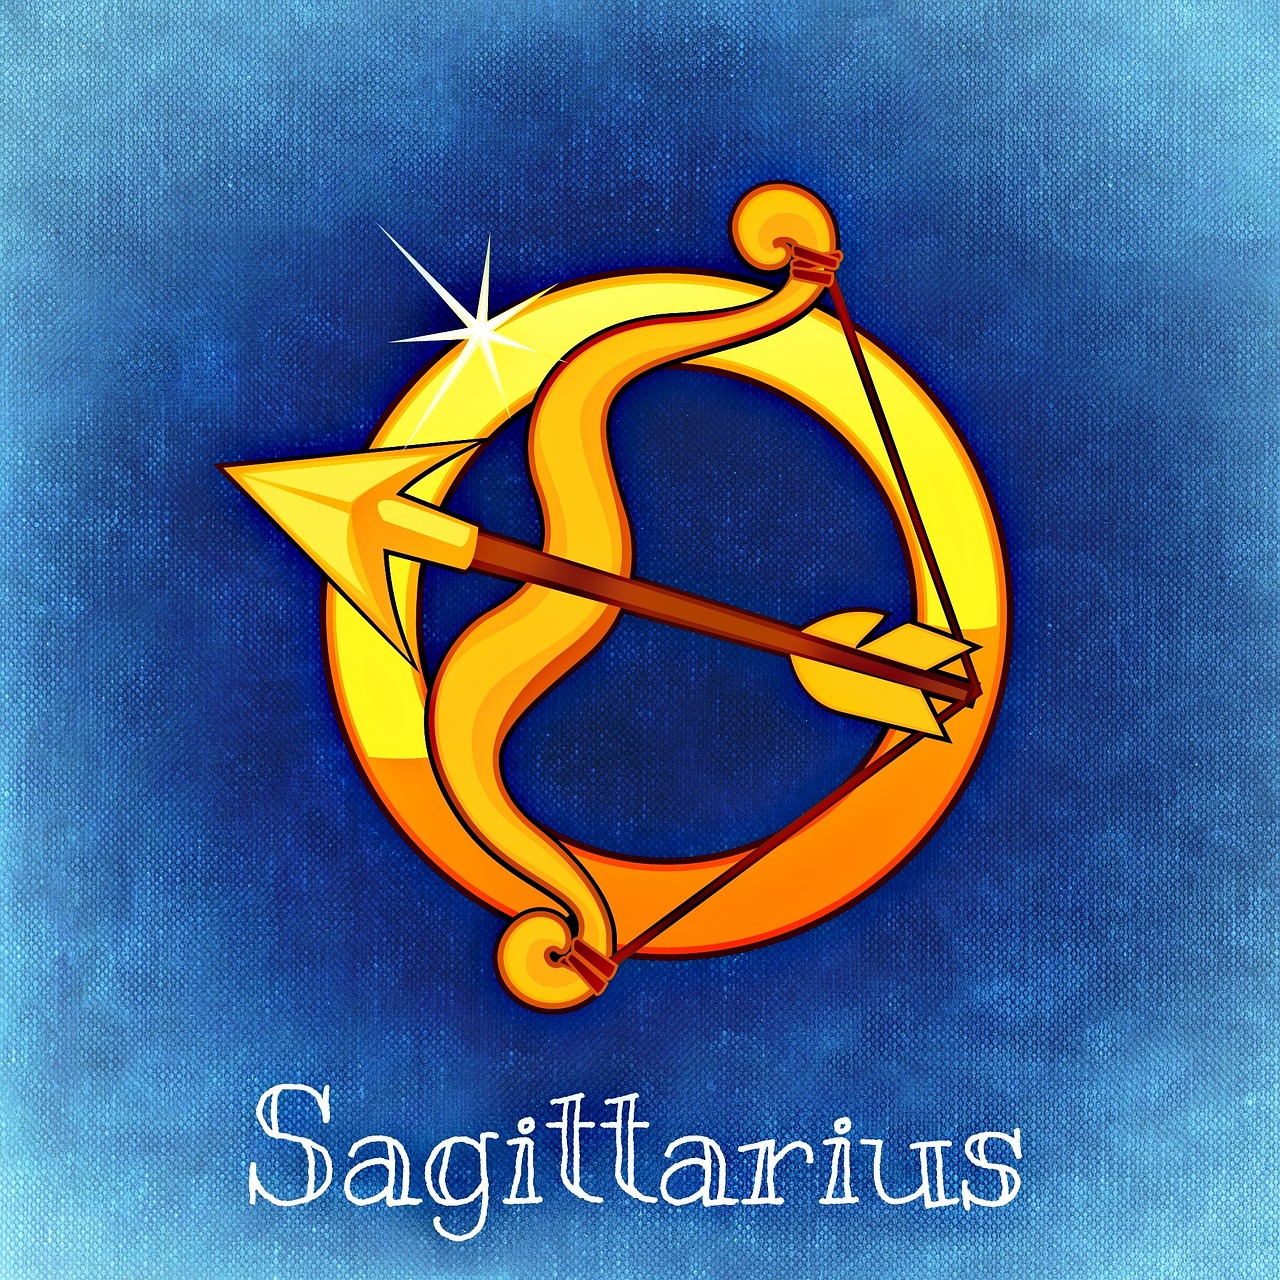 a picture of a zodiac sign on a blue background, sots art, scimitar, higher detailed illustration, full color illustration, arrow